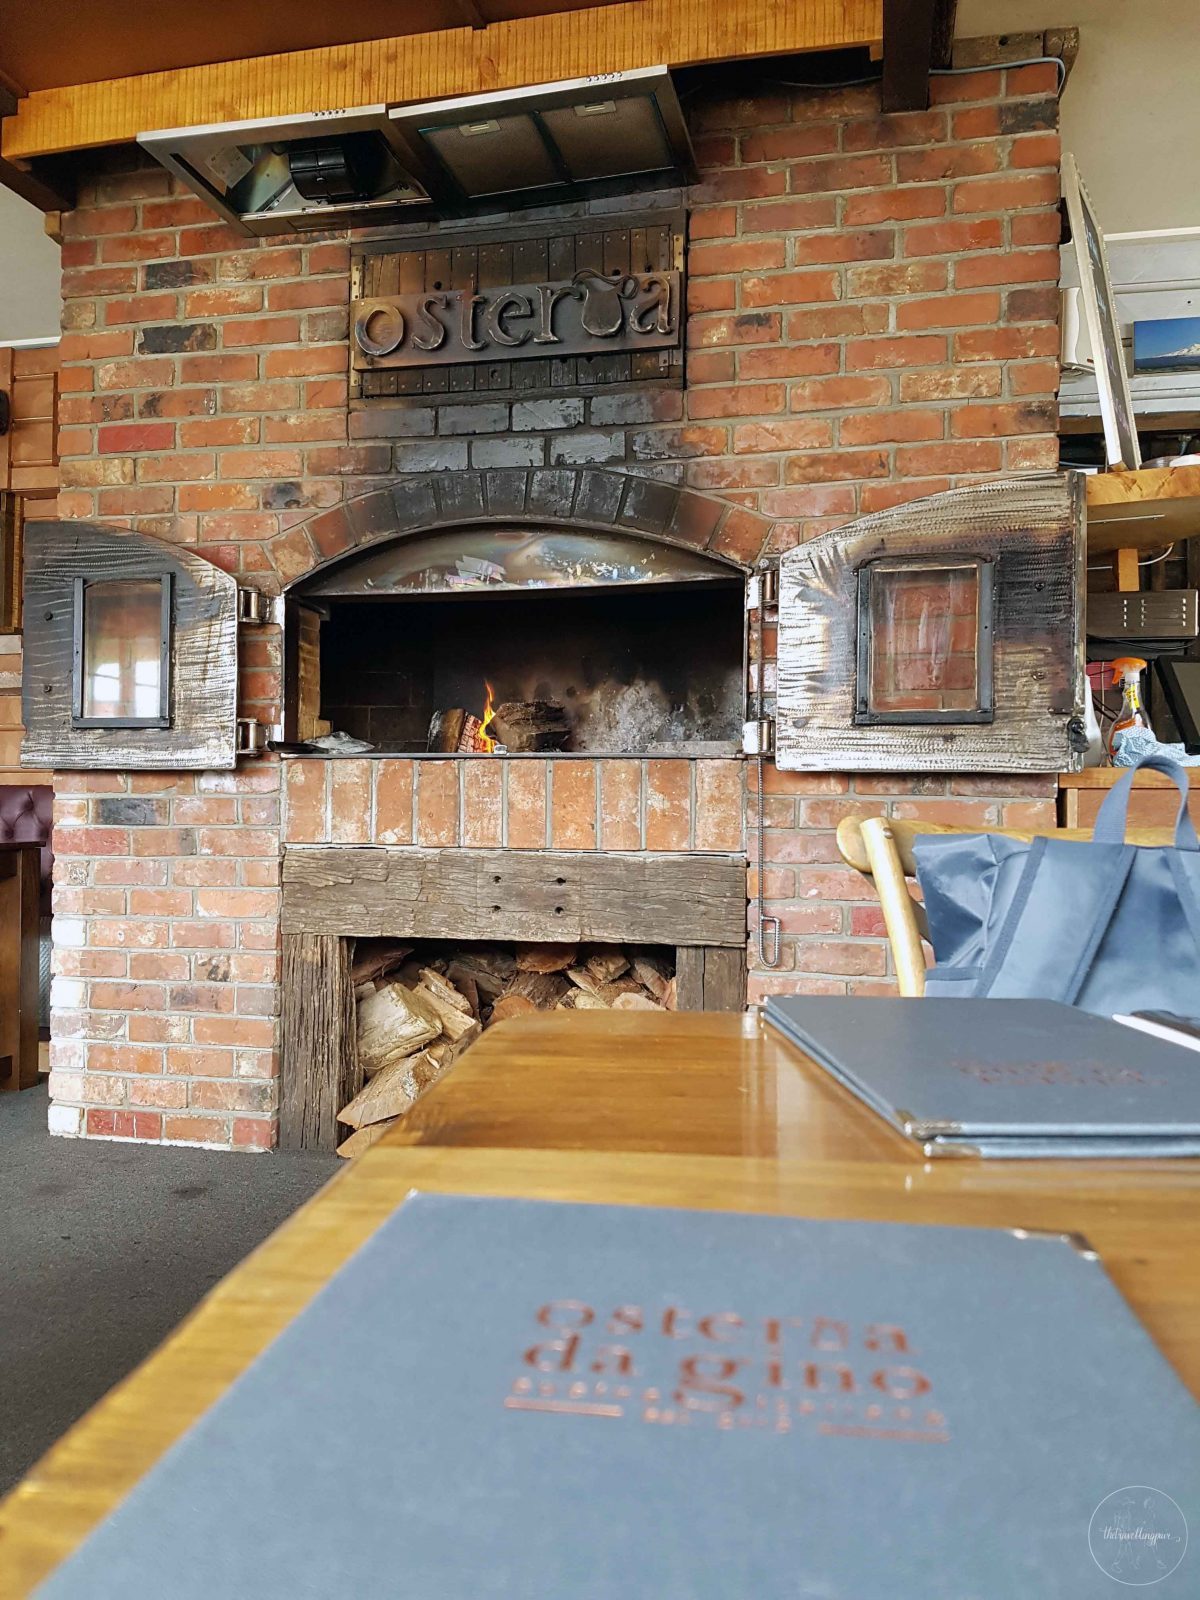 Osteria-Fire-Place